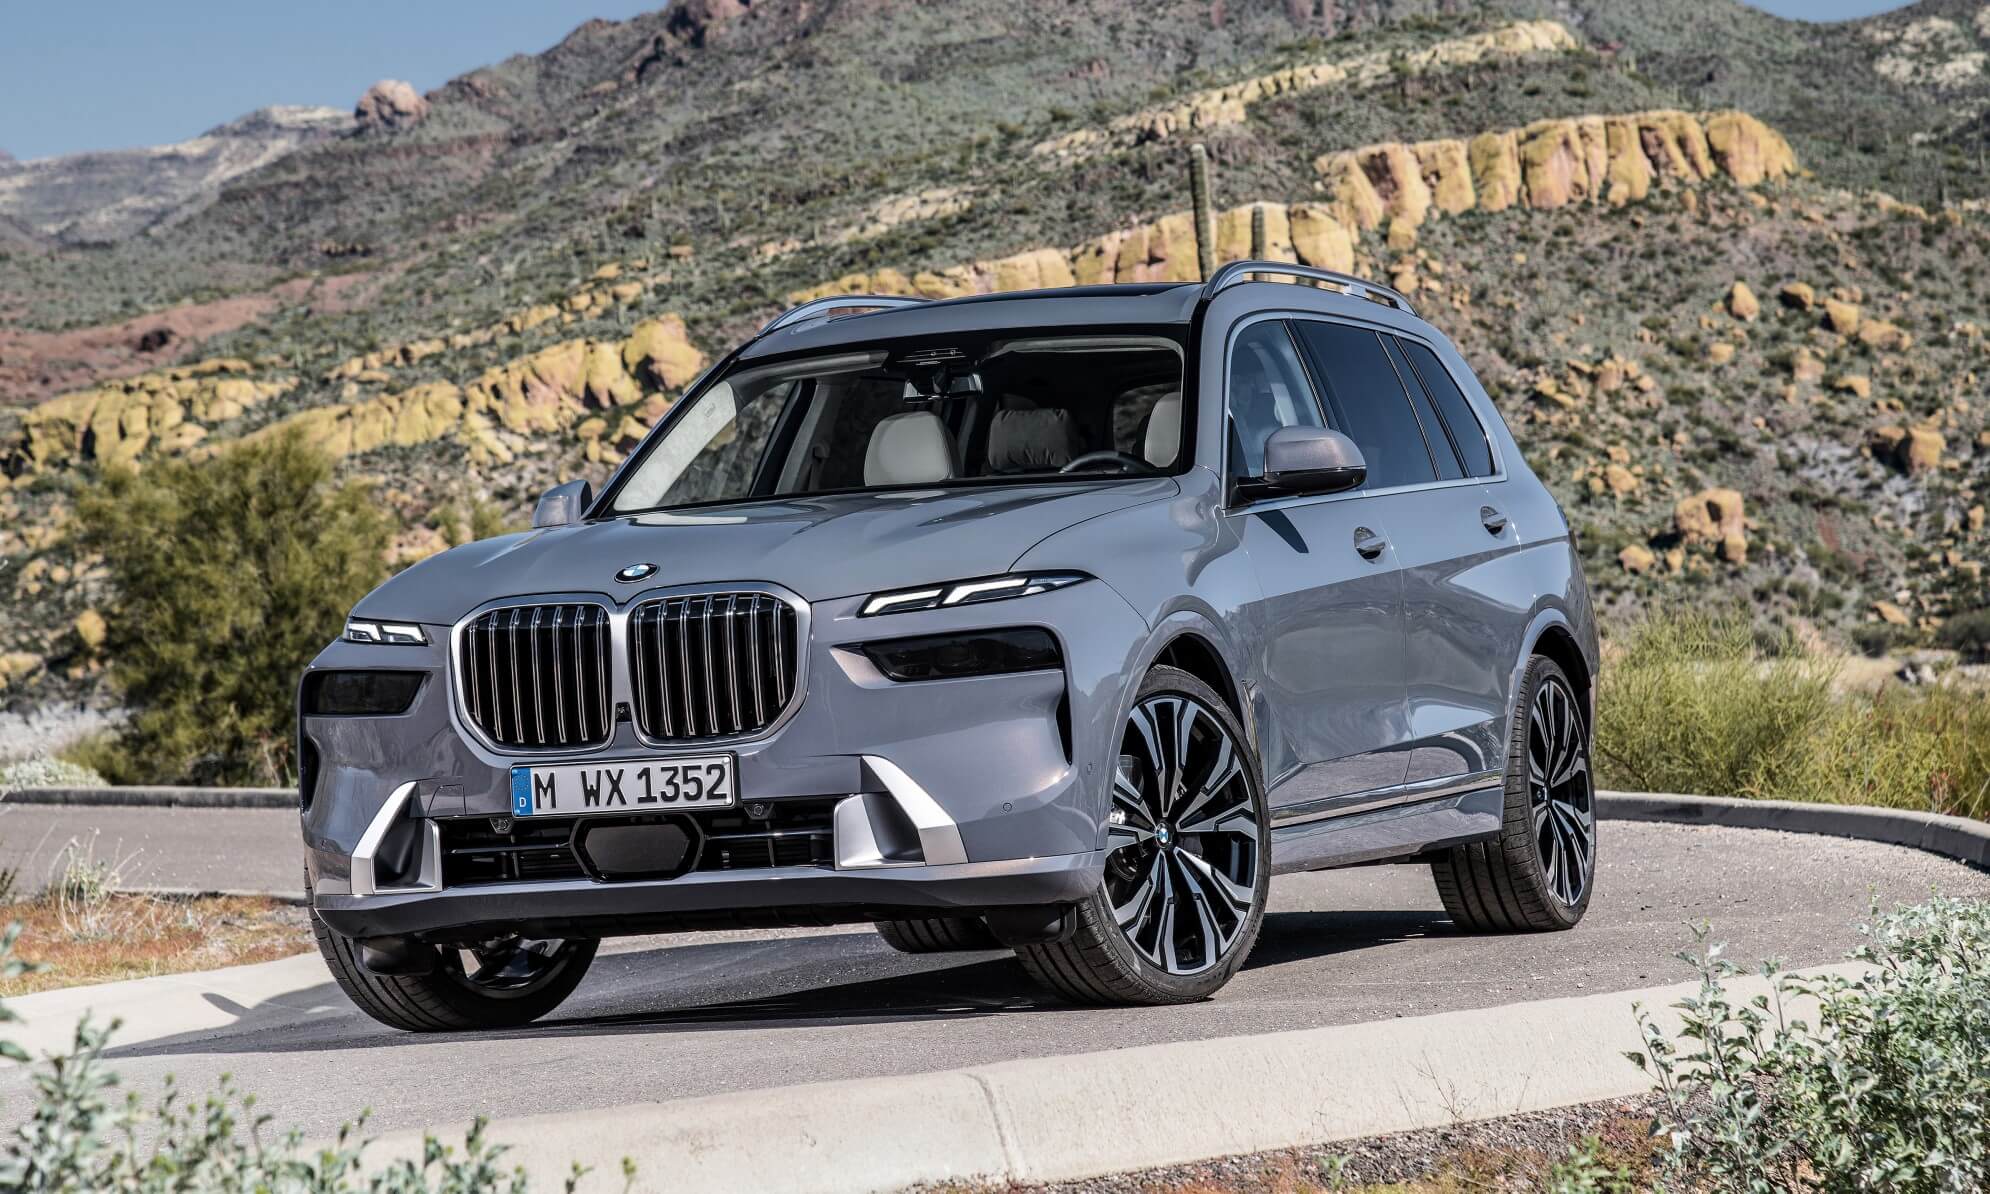 Facelifted BMW X7